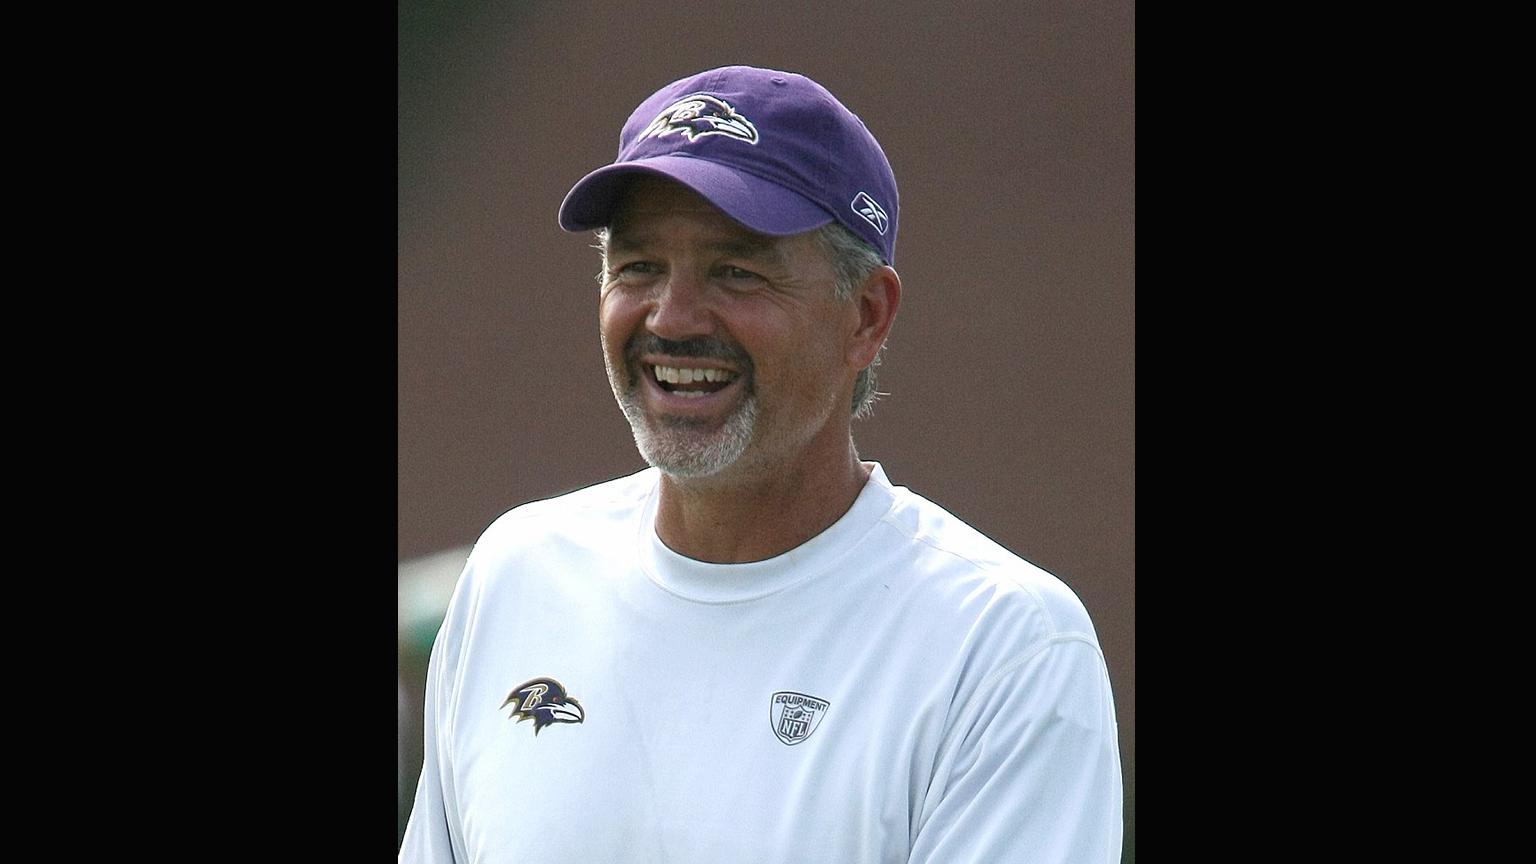 Chuck Pagano at the Baltimore Ravens training camp on Aug. 20, 2009. (Keith Allison via Wikimedia Commons)